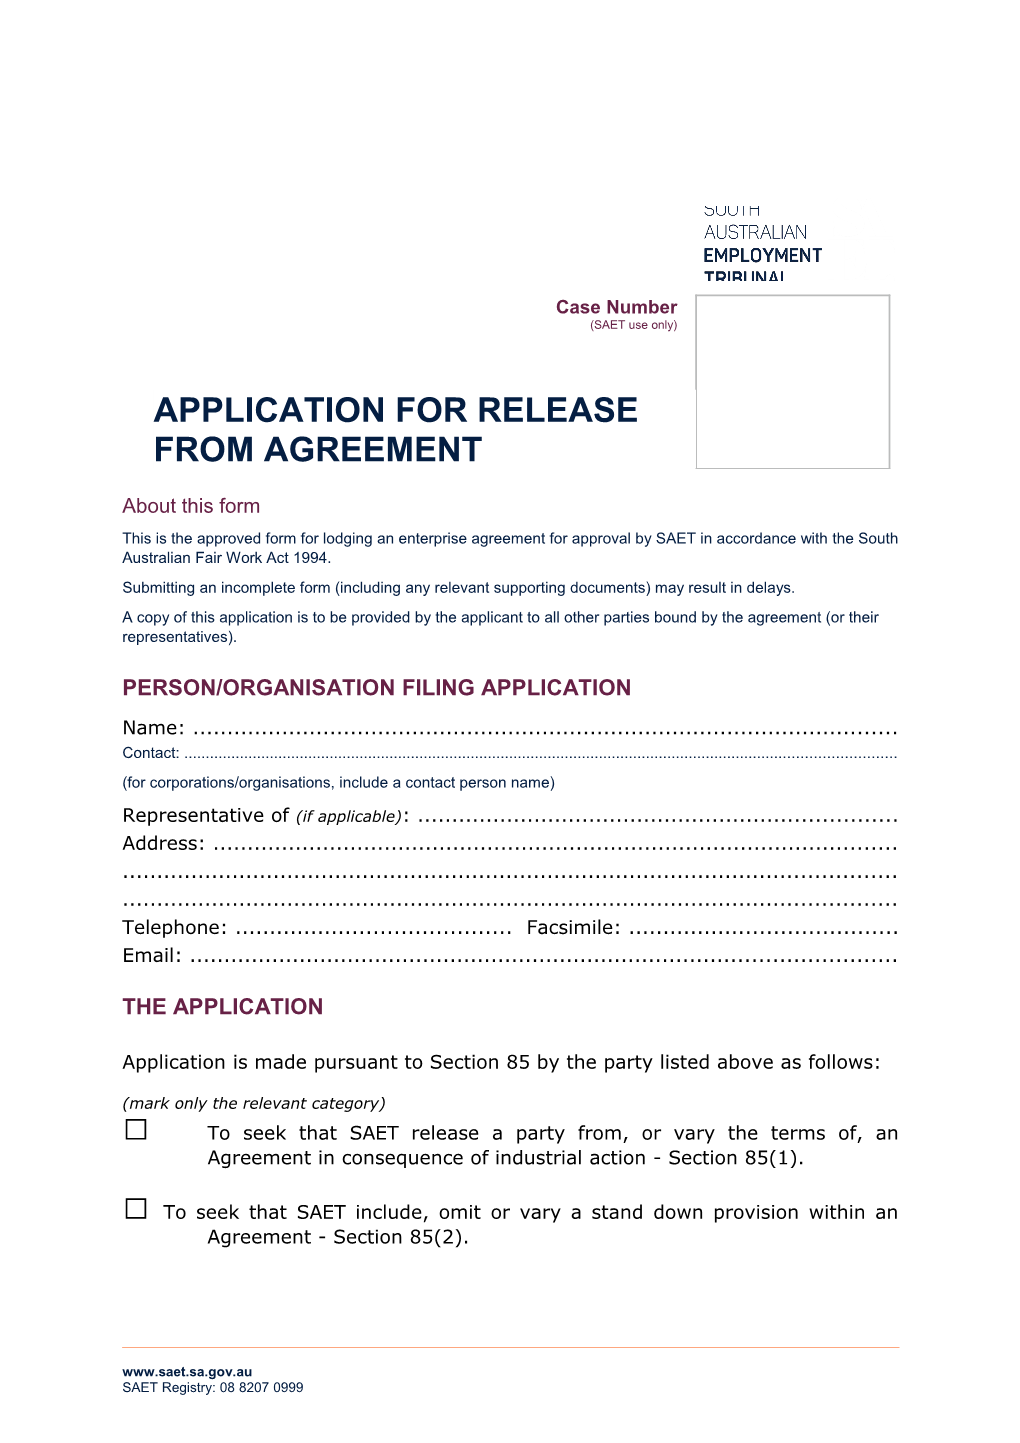 Application for Release from Agreement